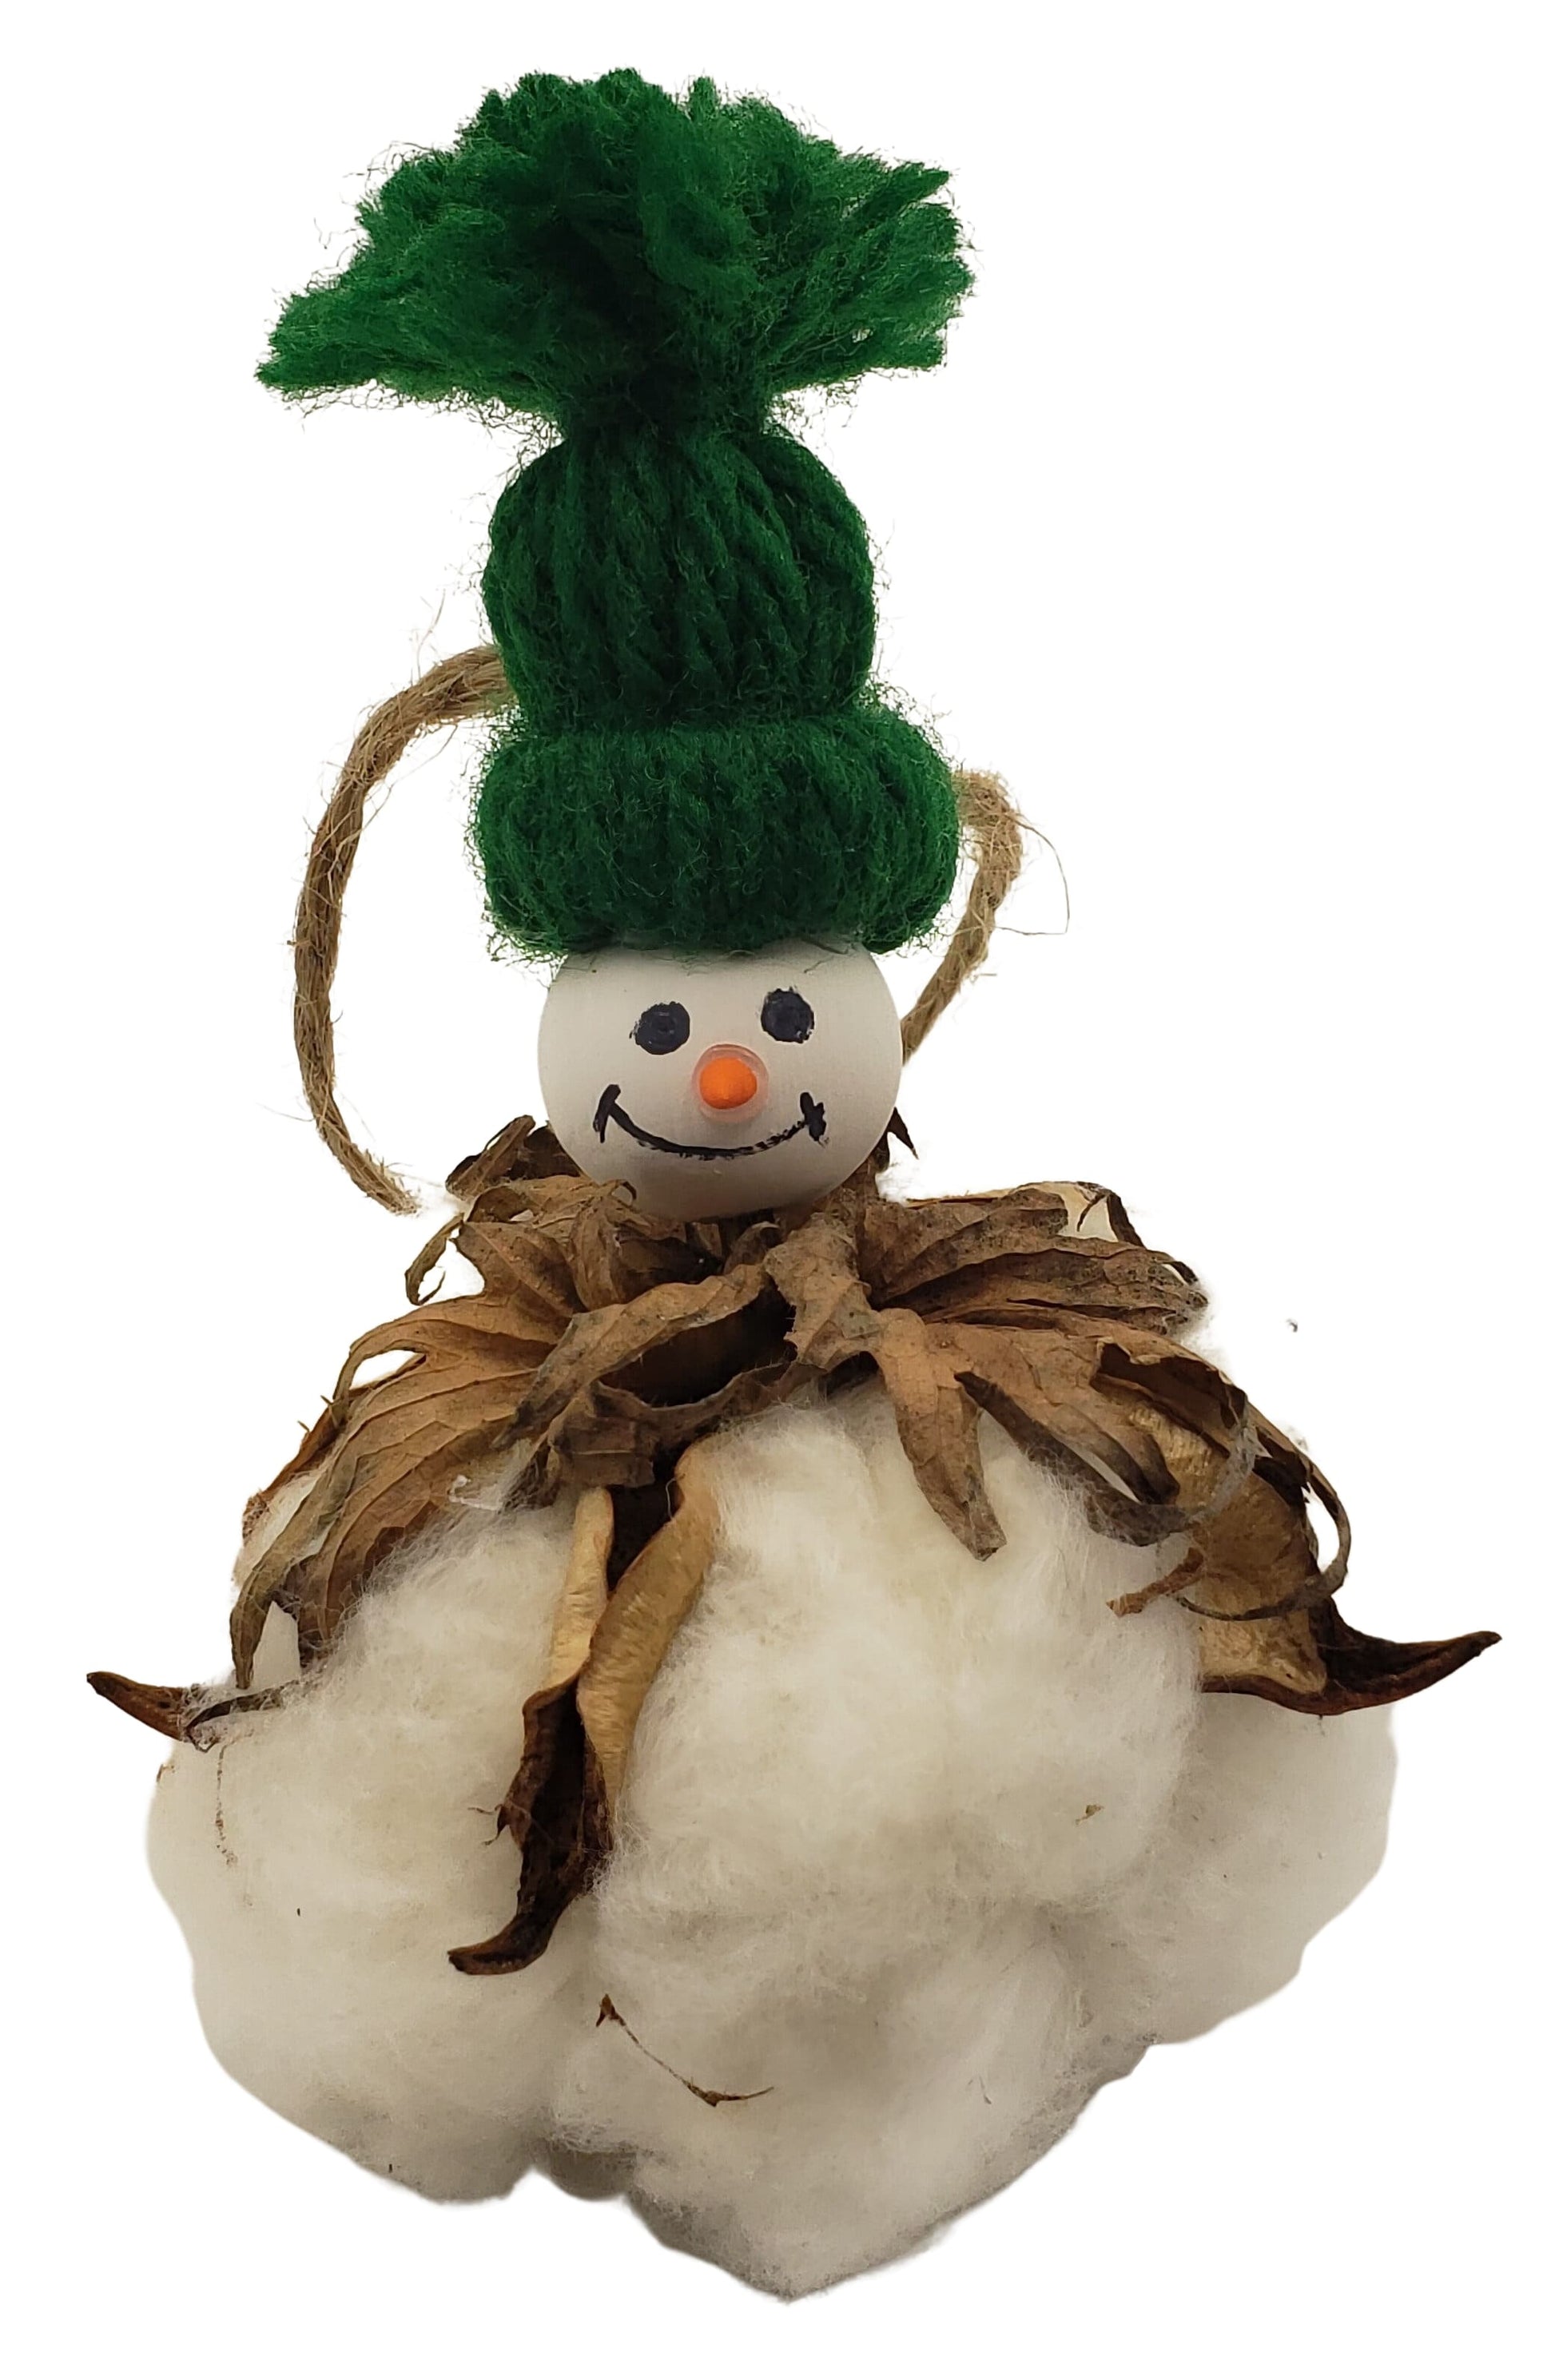 Natures Christmas - cotton boll snowman Christmas tree ornament with green toboggan hat